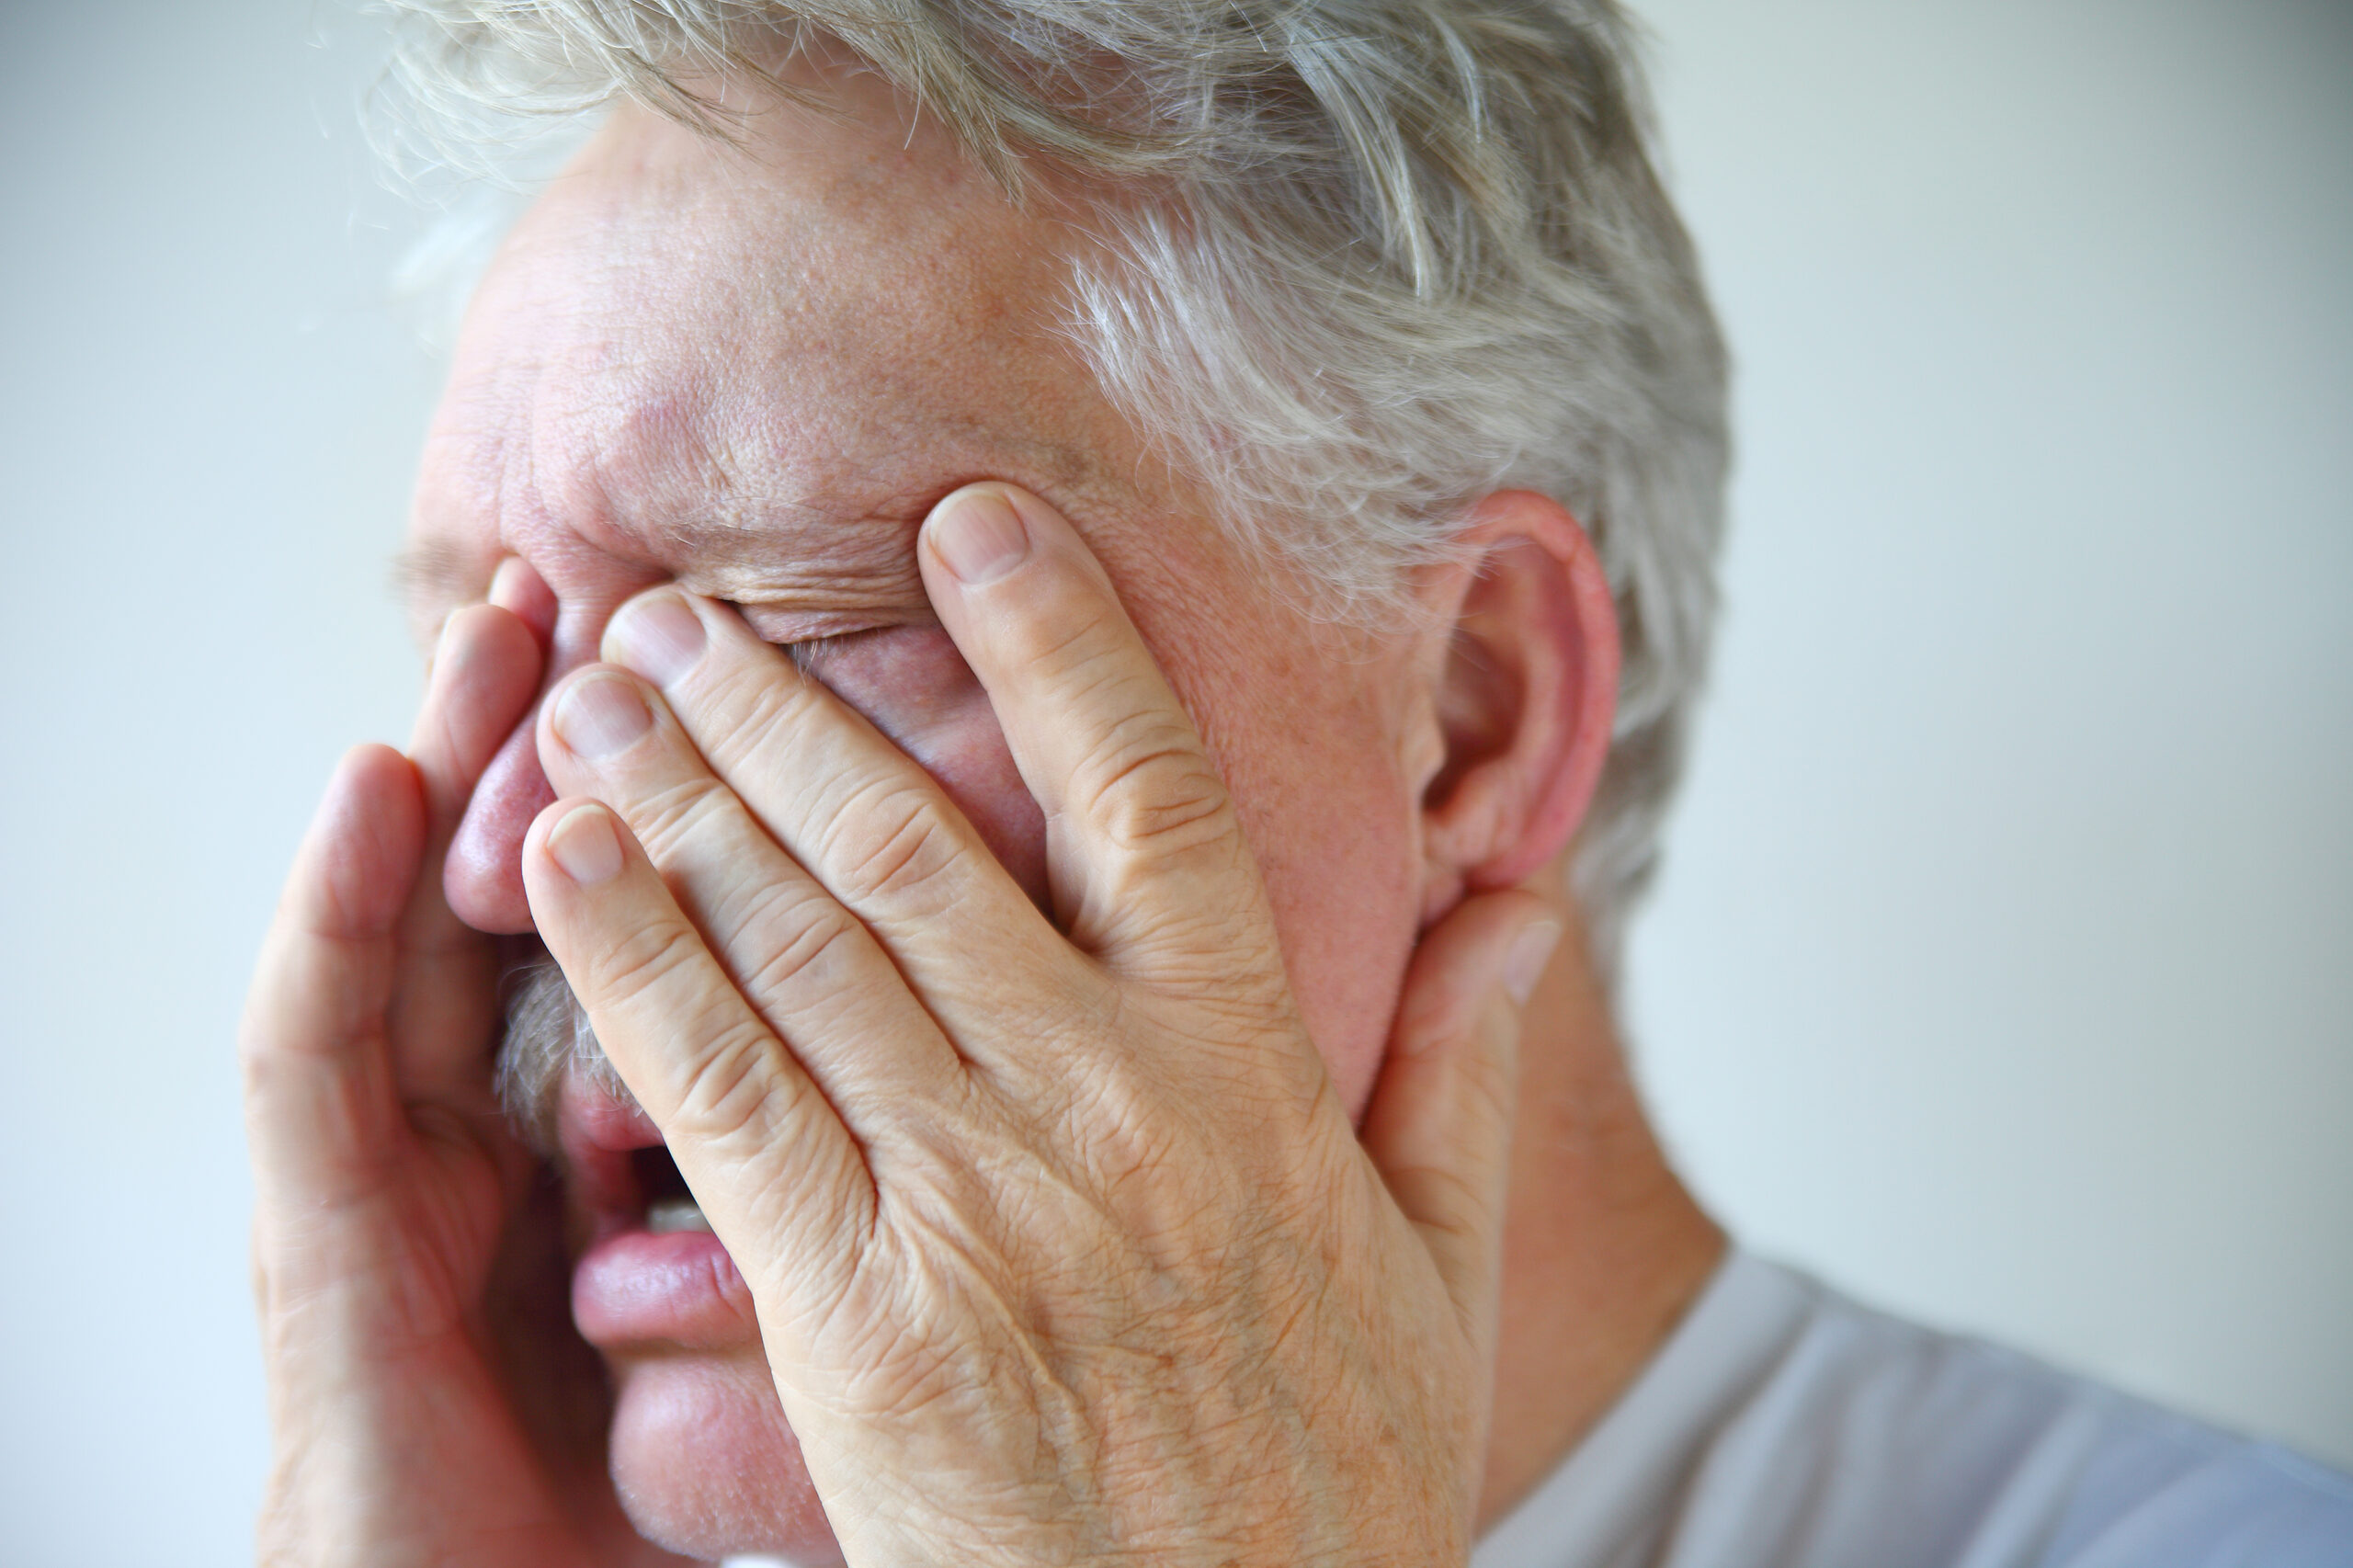 A senior man experiencing stuffy nose, clogged sinuses and headache of a bad flu or cold